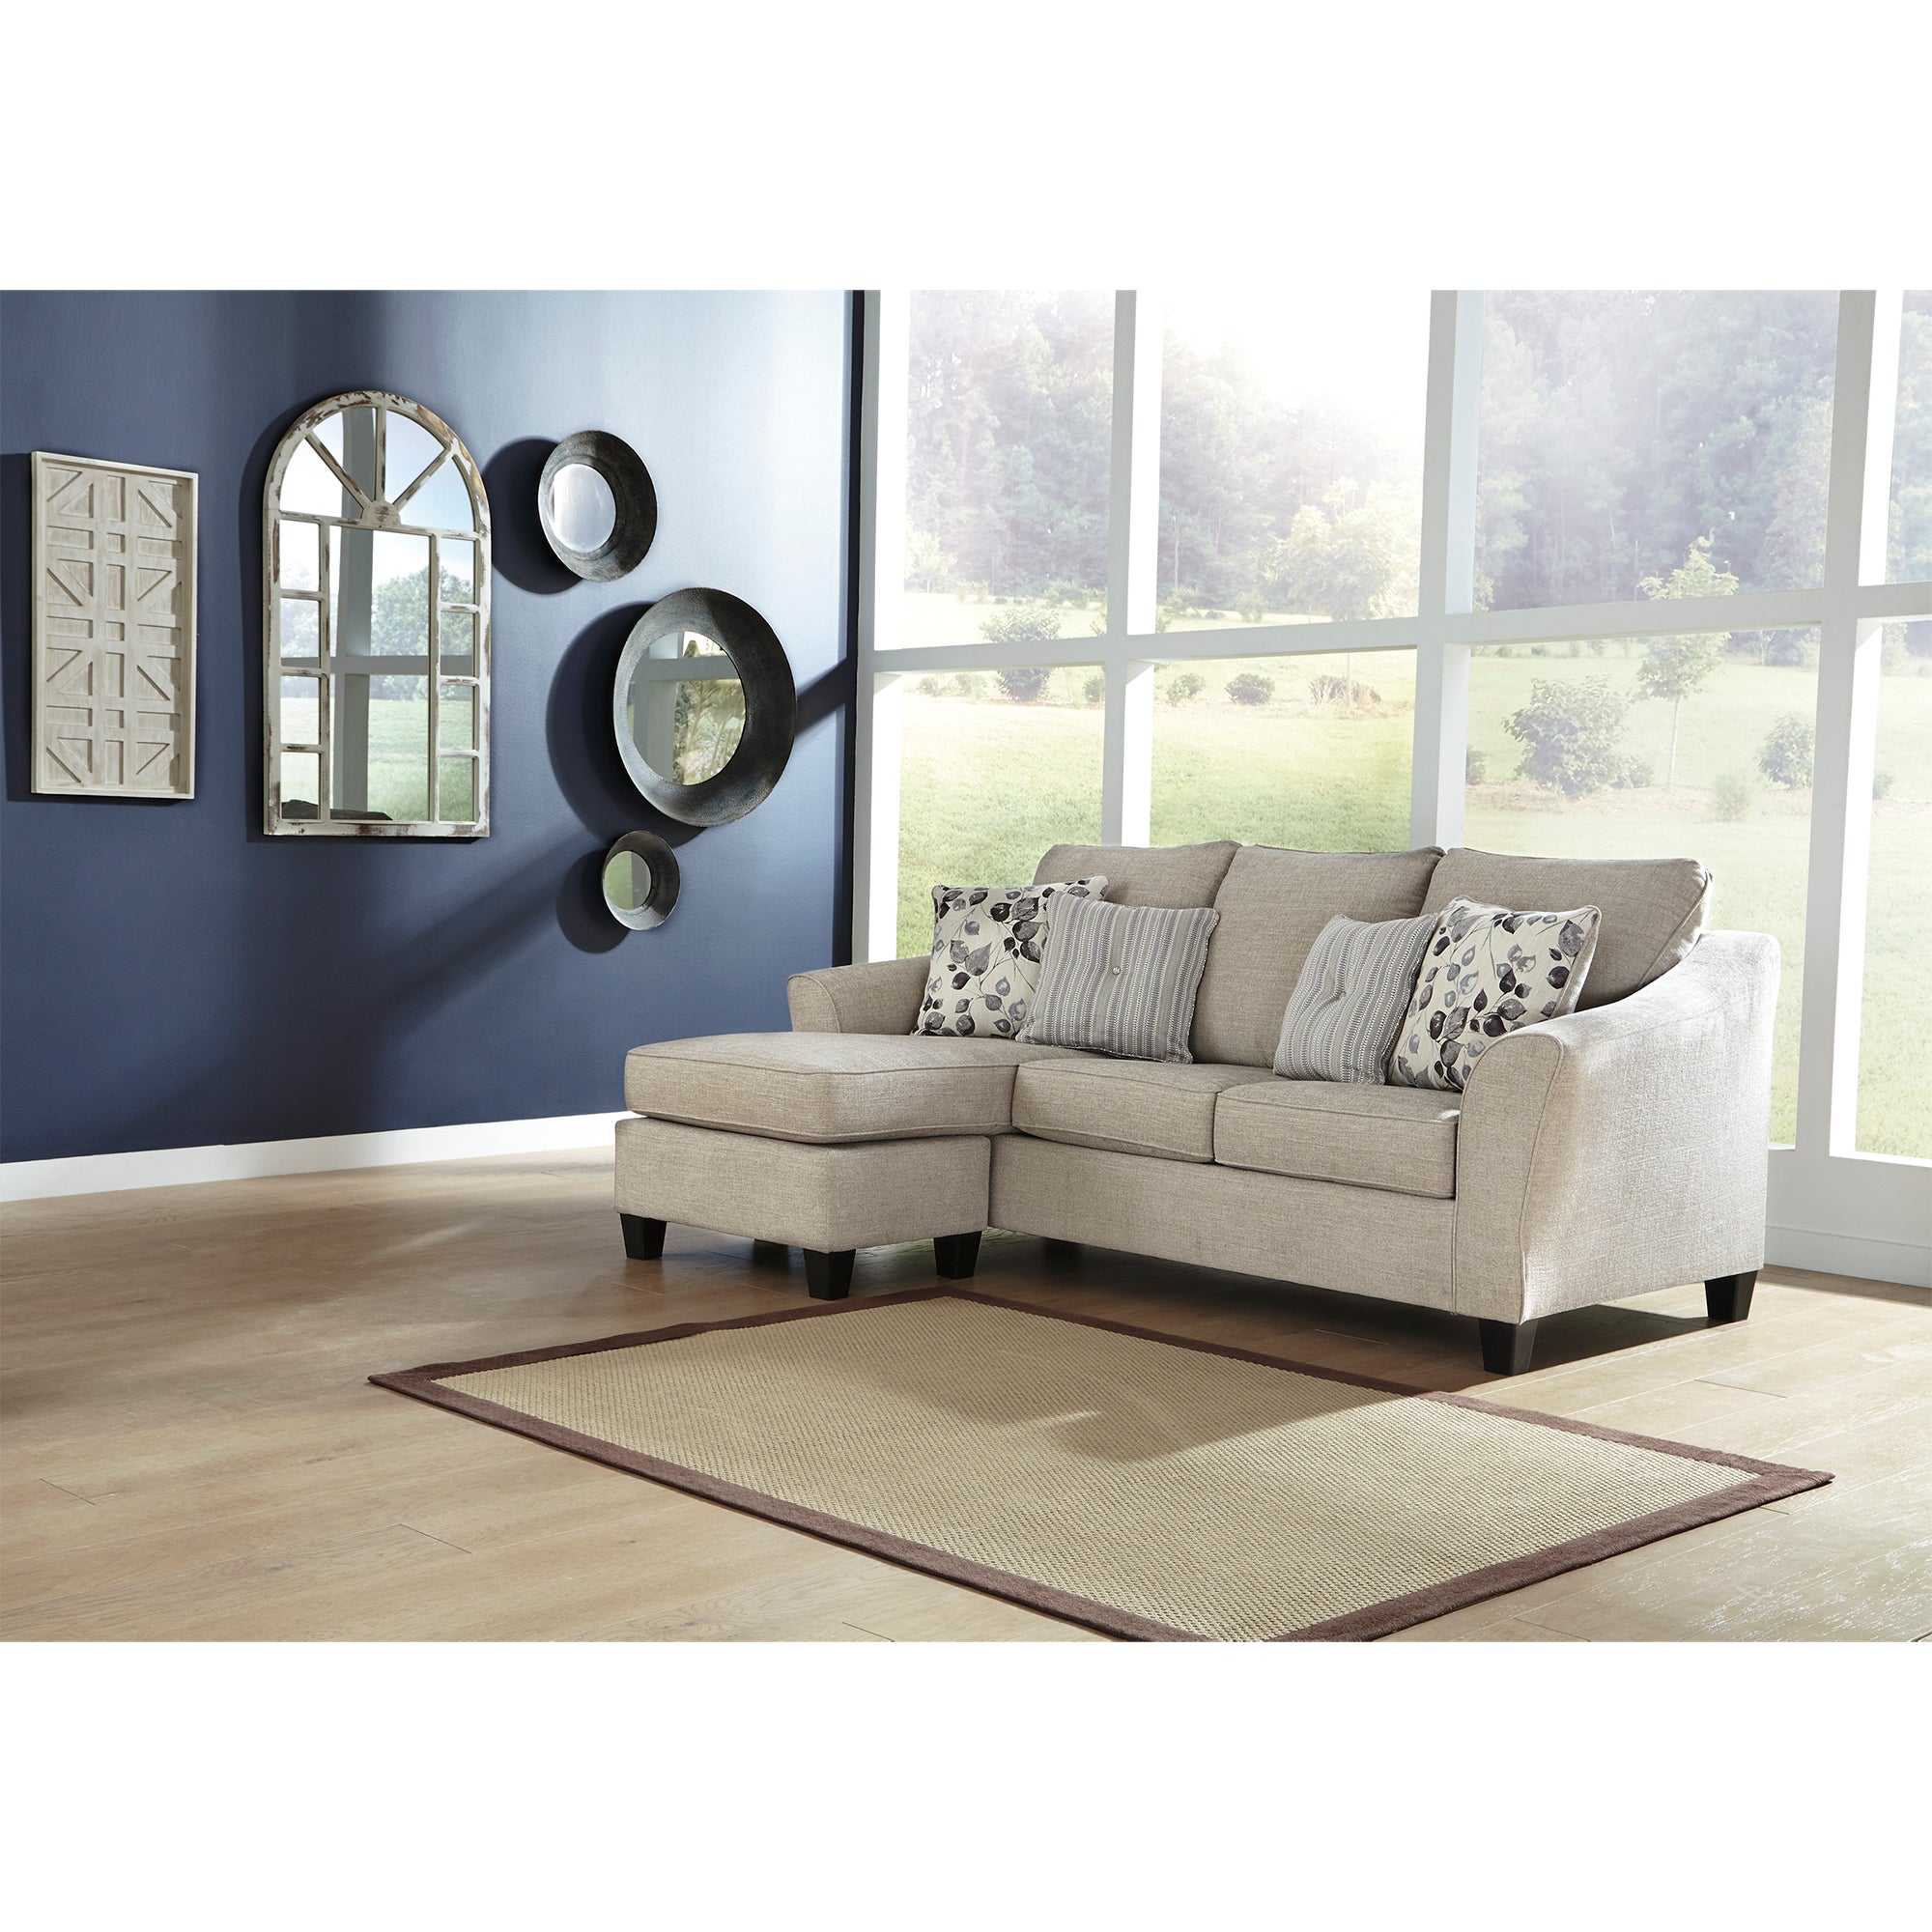 Abney Sofa Chaise, Chair, and Ottoman